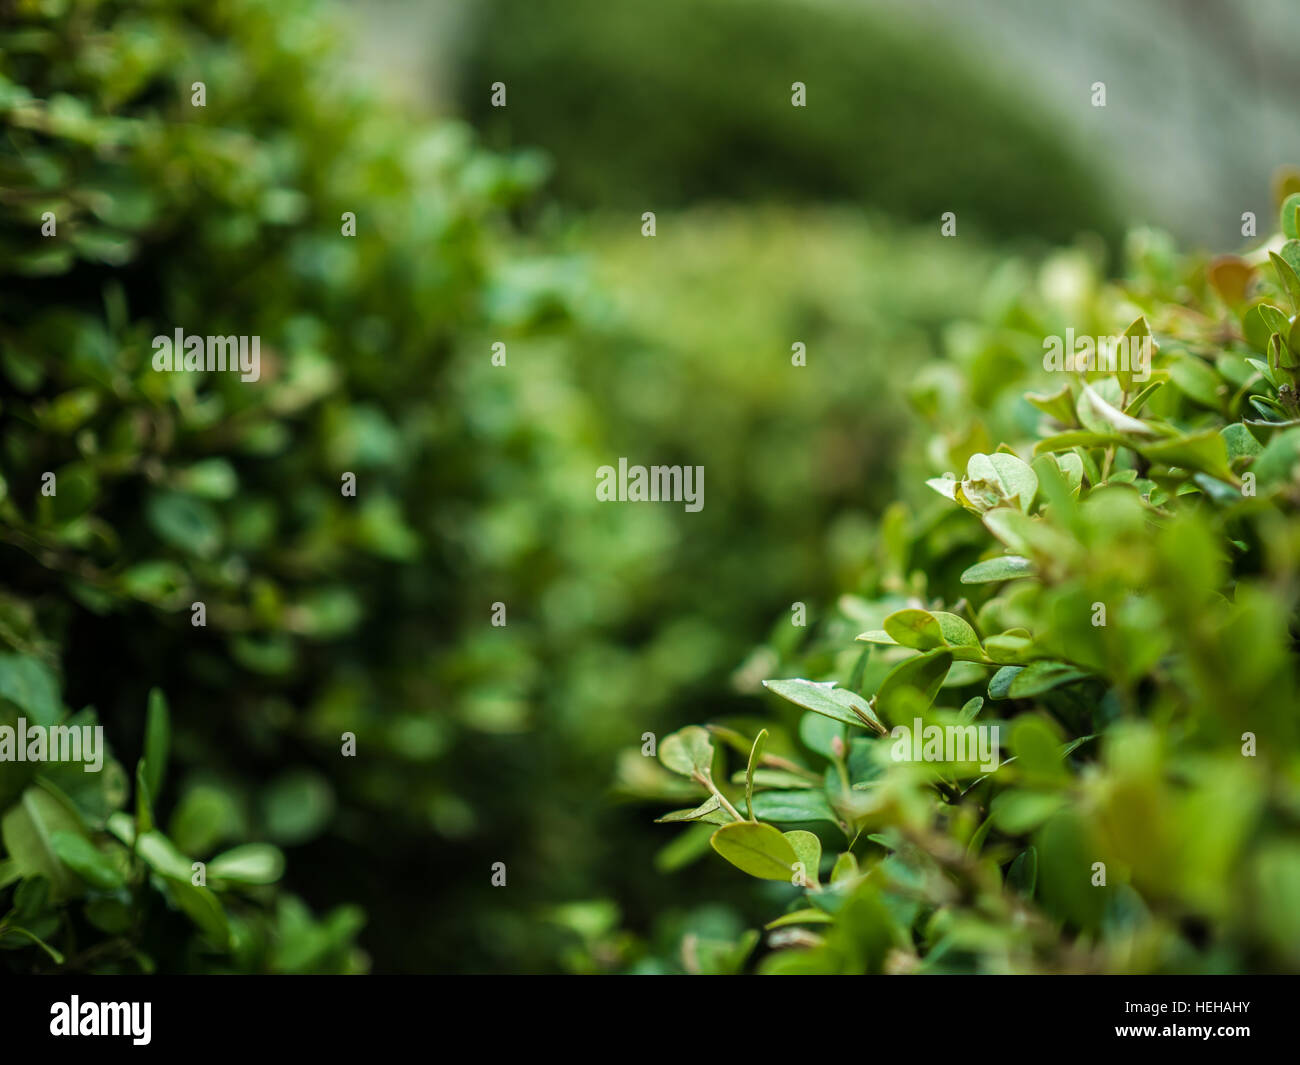 Close-up shot of green bushes in fall and winter months. A perfect background for any project. Stock Photo